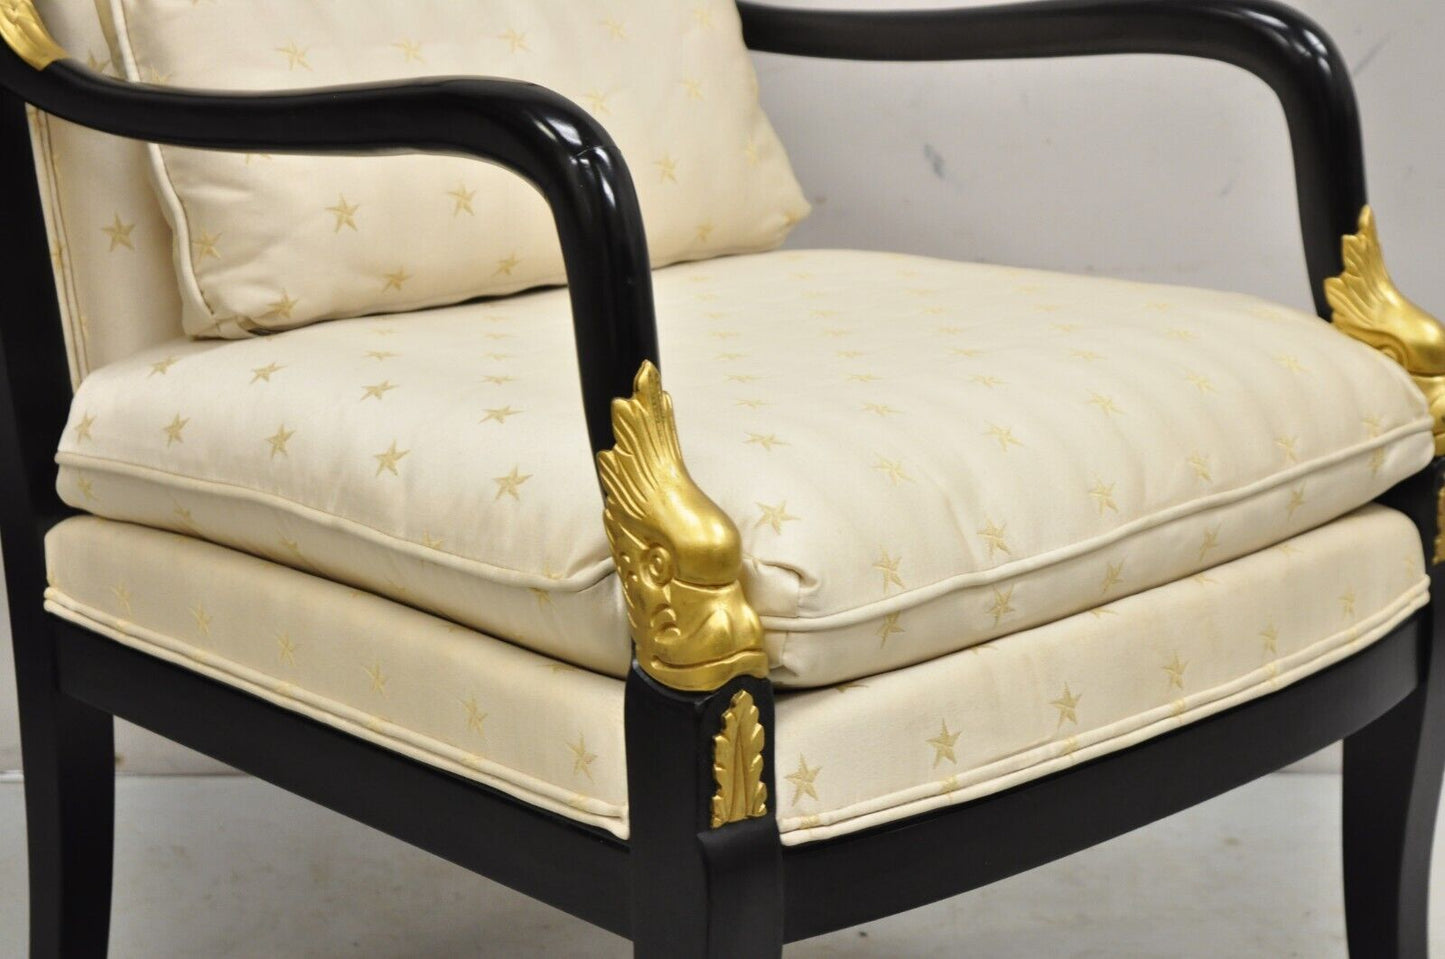 Ethan Allen French Empire Style Black Lacquer Gold Dolphin Upholstered Arm Chair